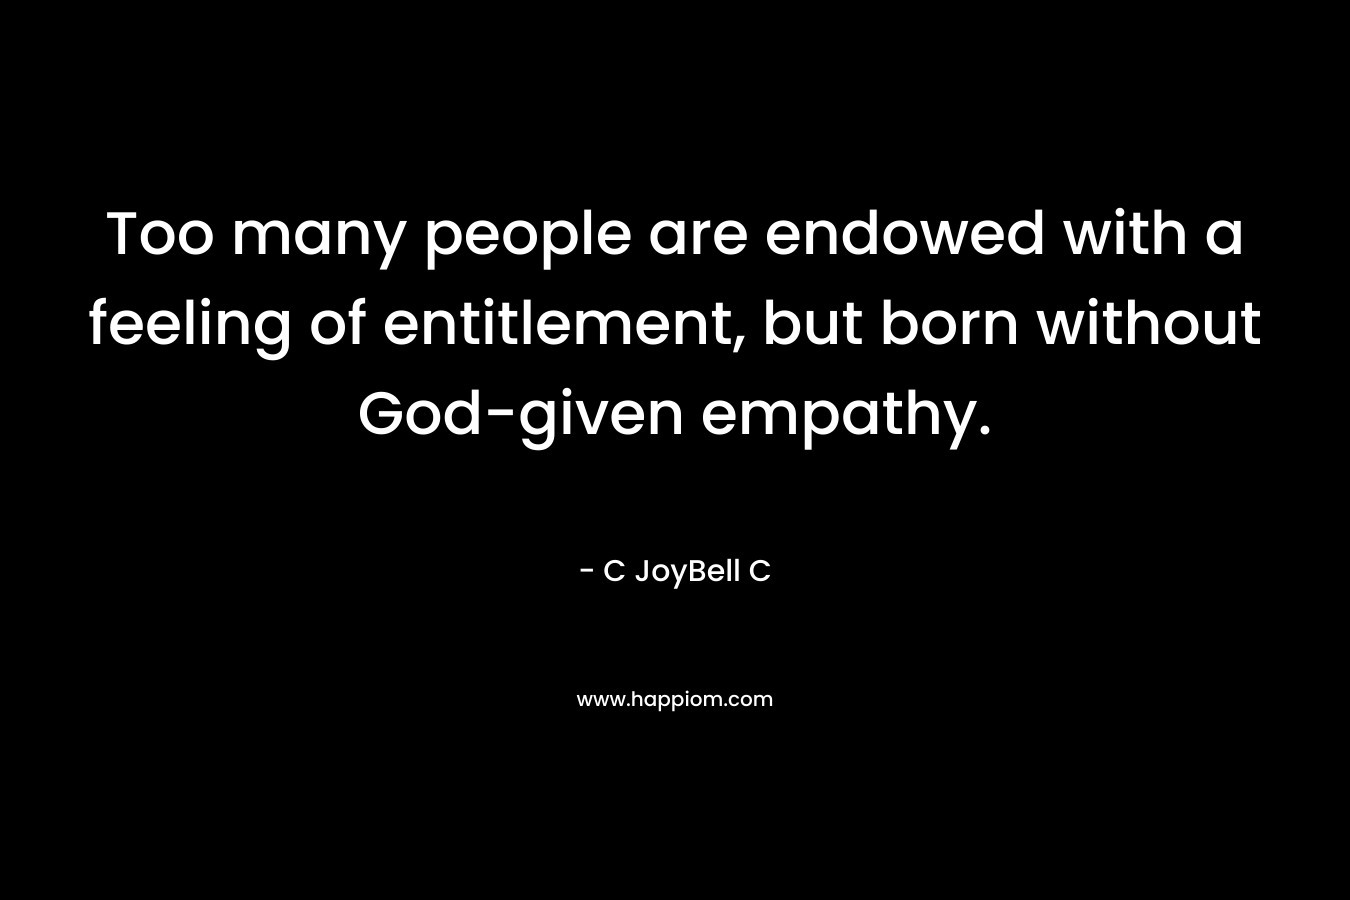 Too many people are endowed with a feeling of entitlement, but born without God-given empathy. – C JoyBell C